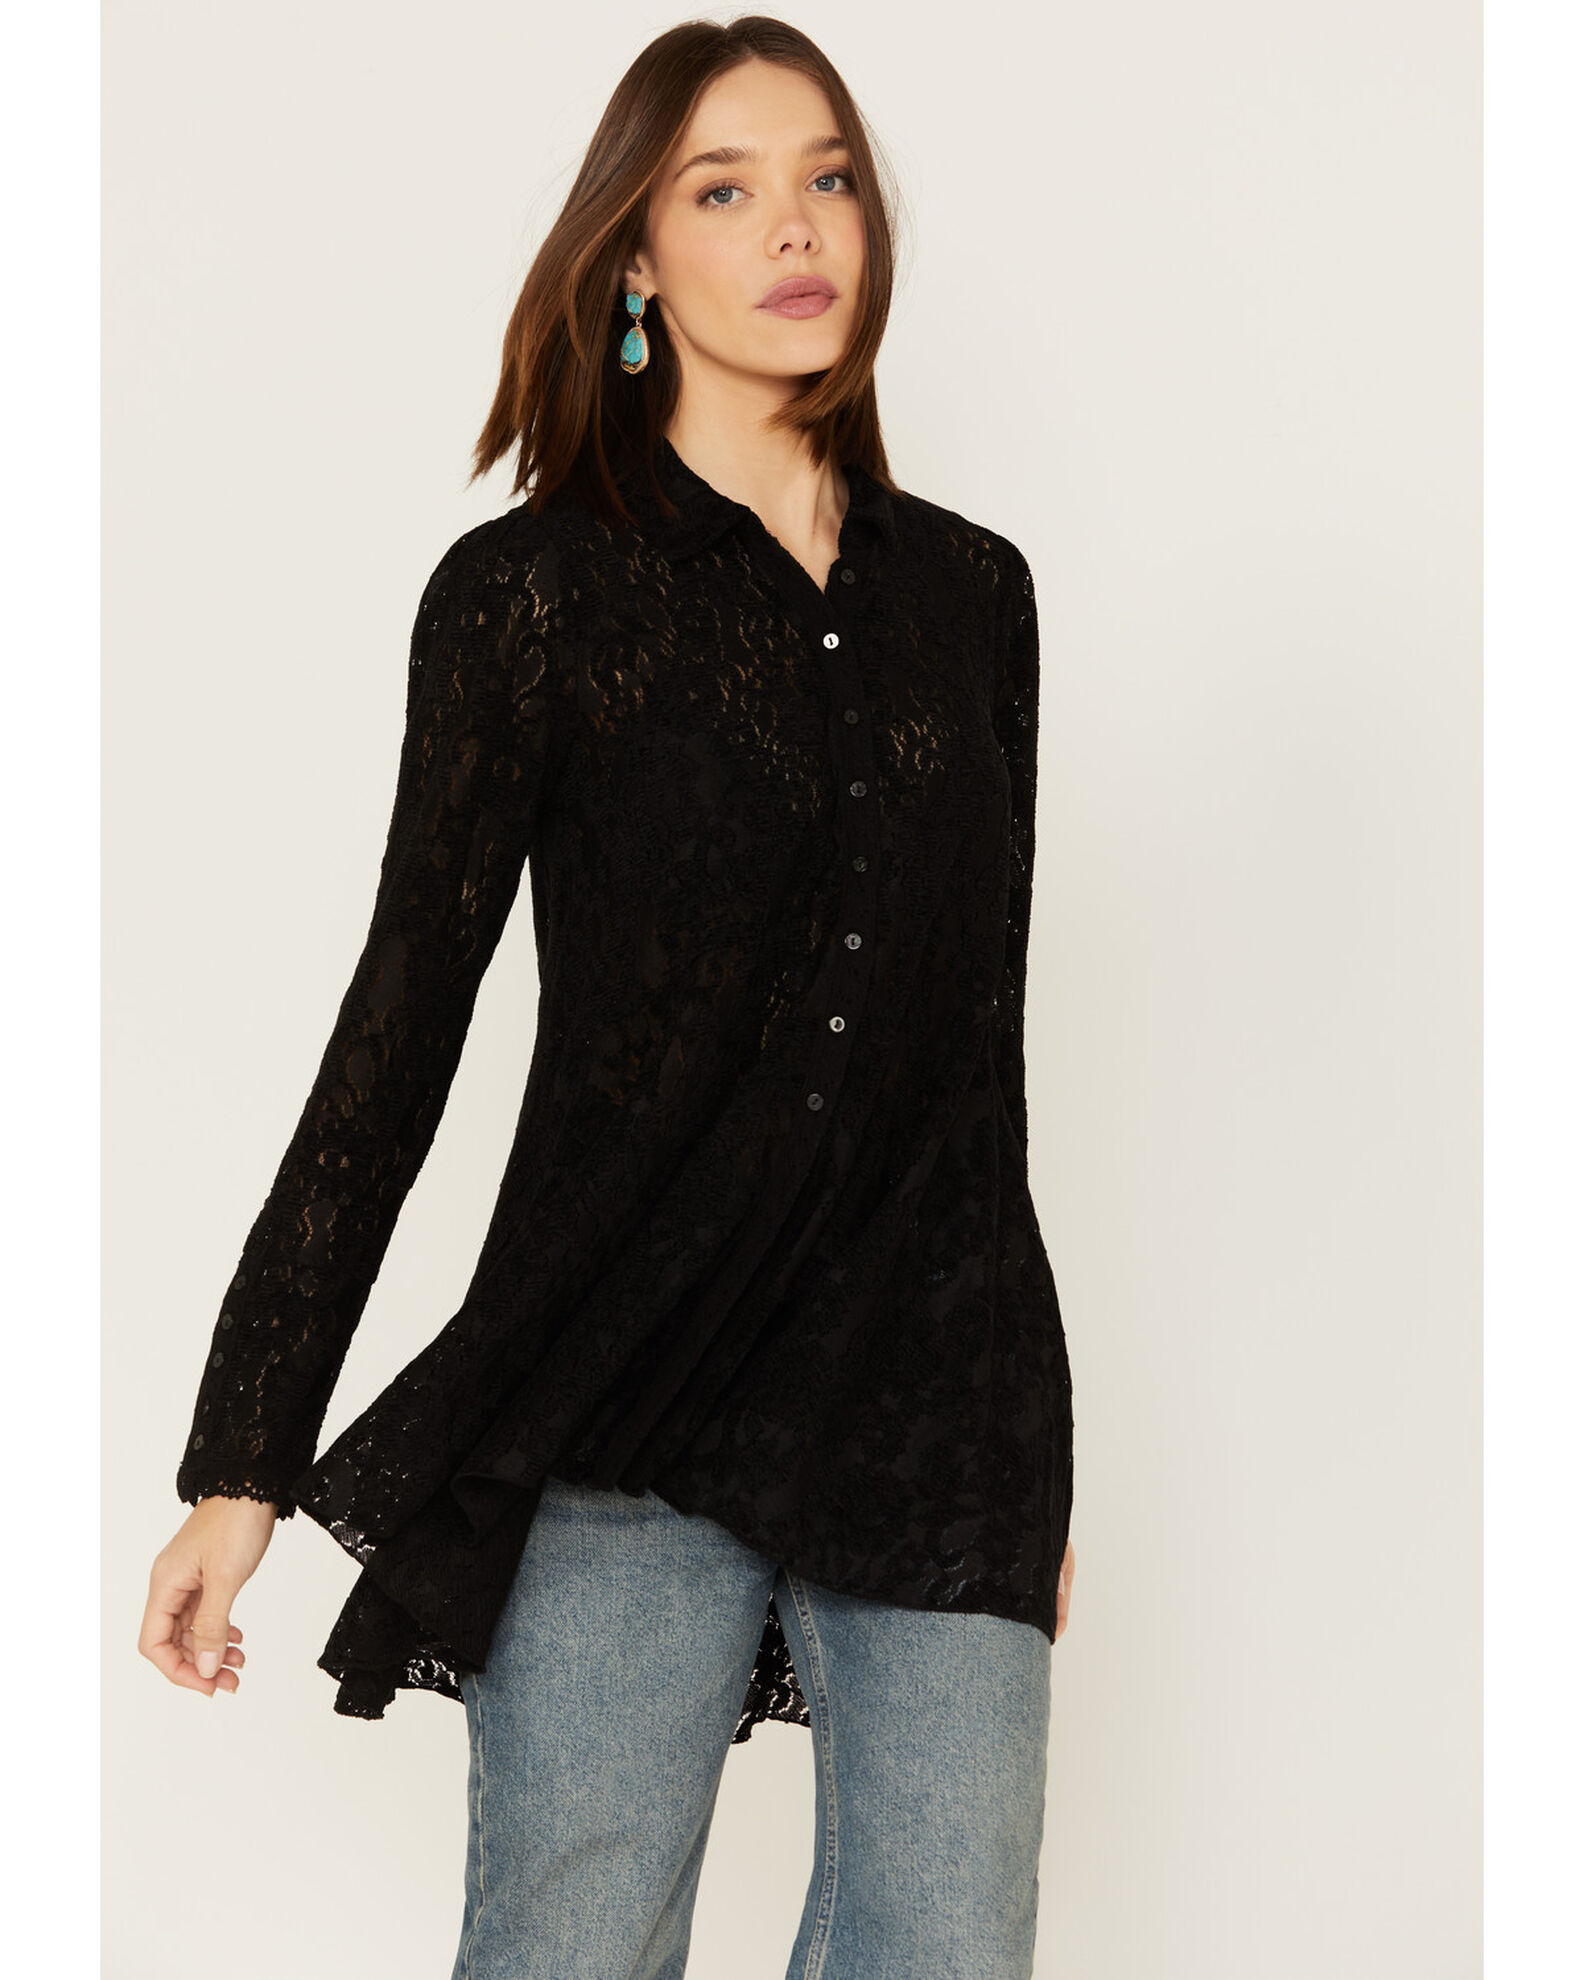 Free People Women's Floral Lace Heather Tunic